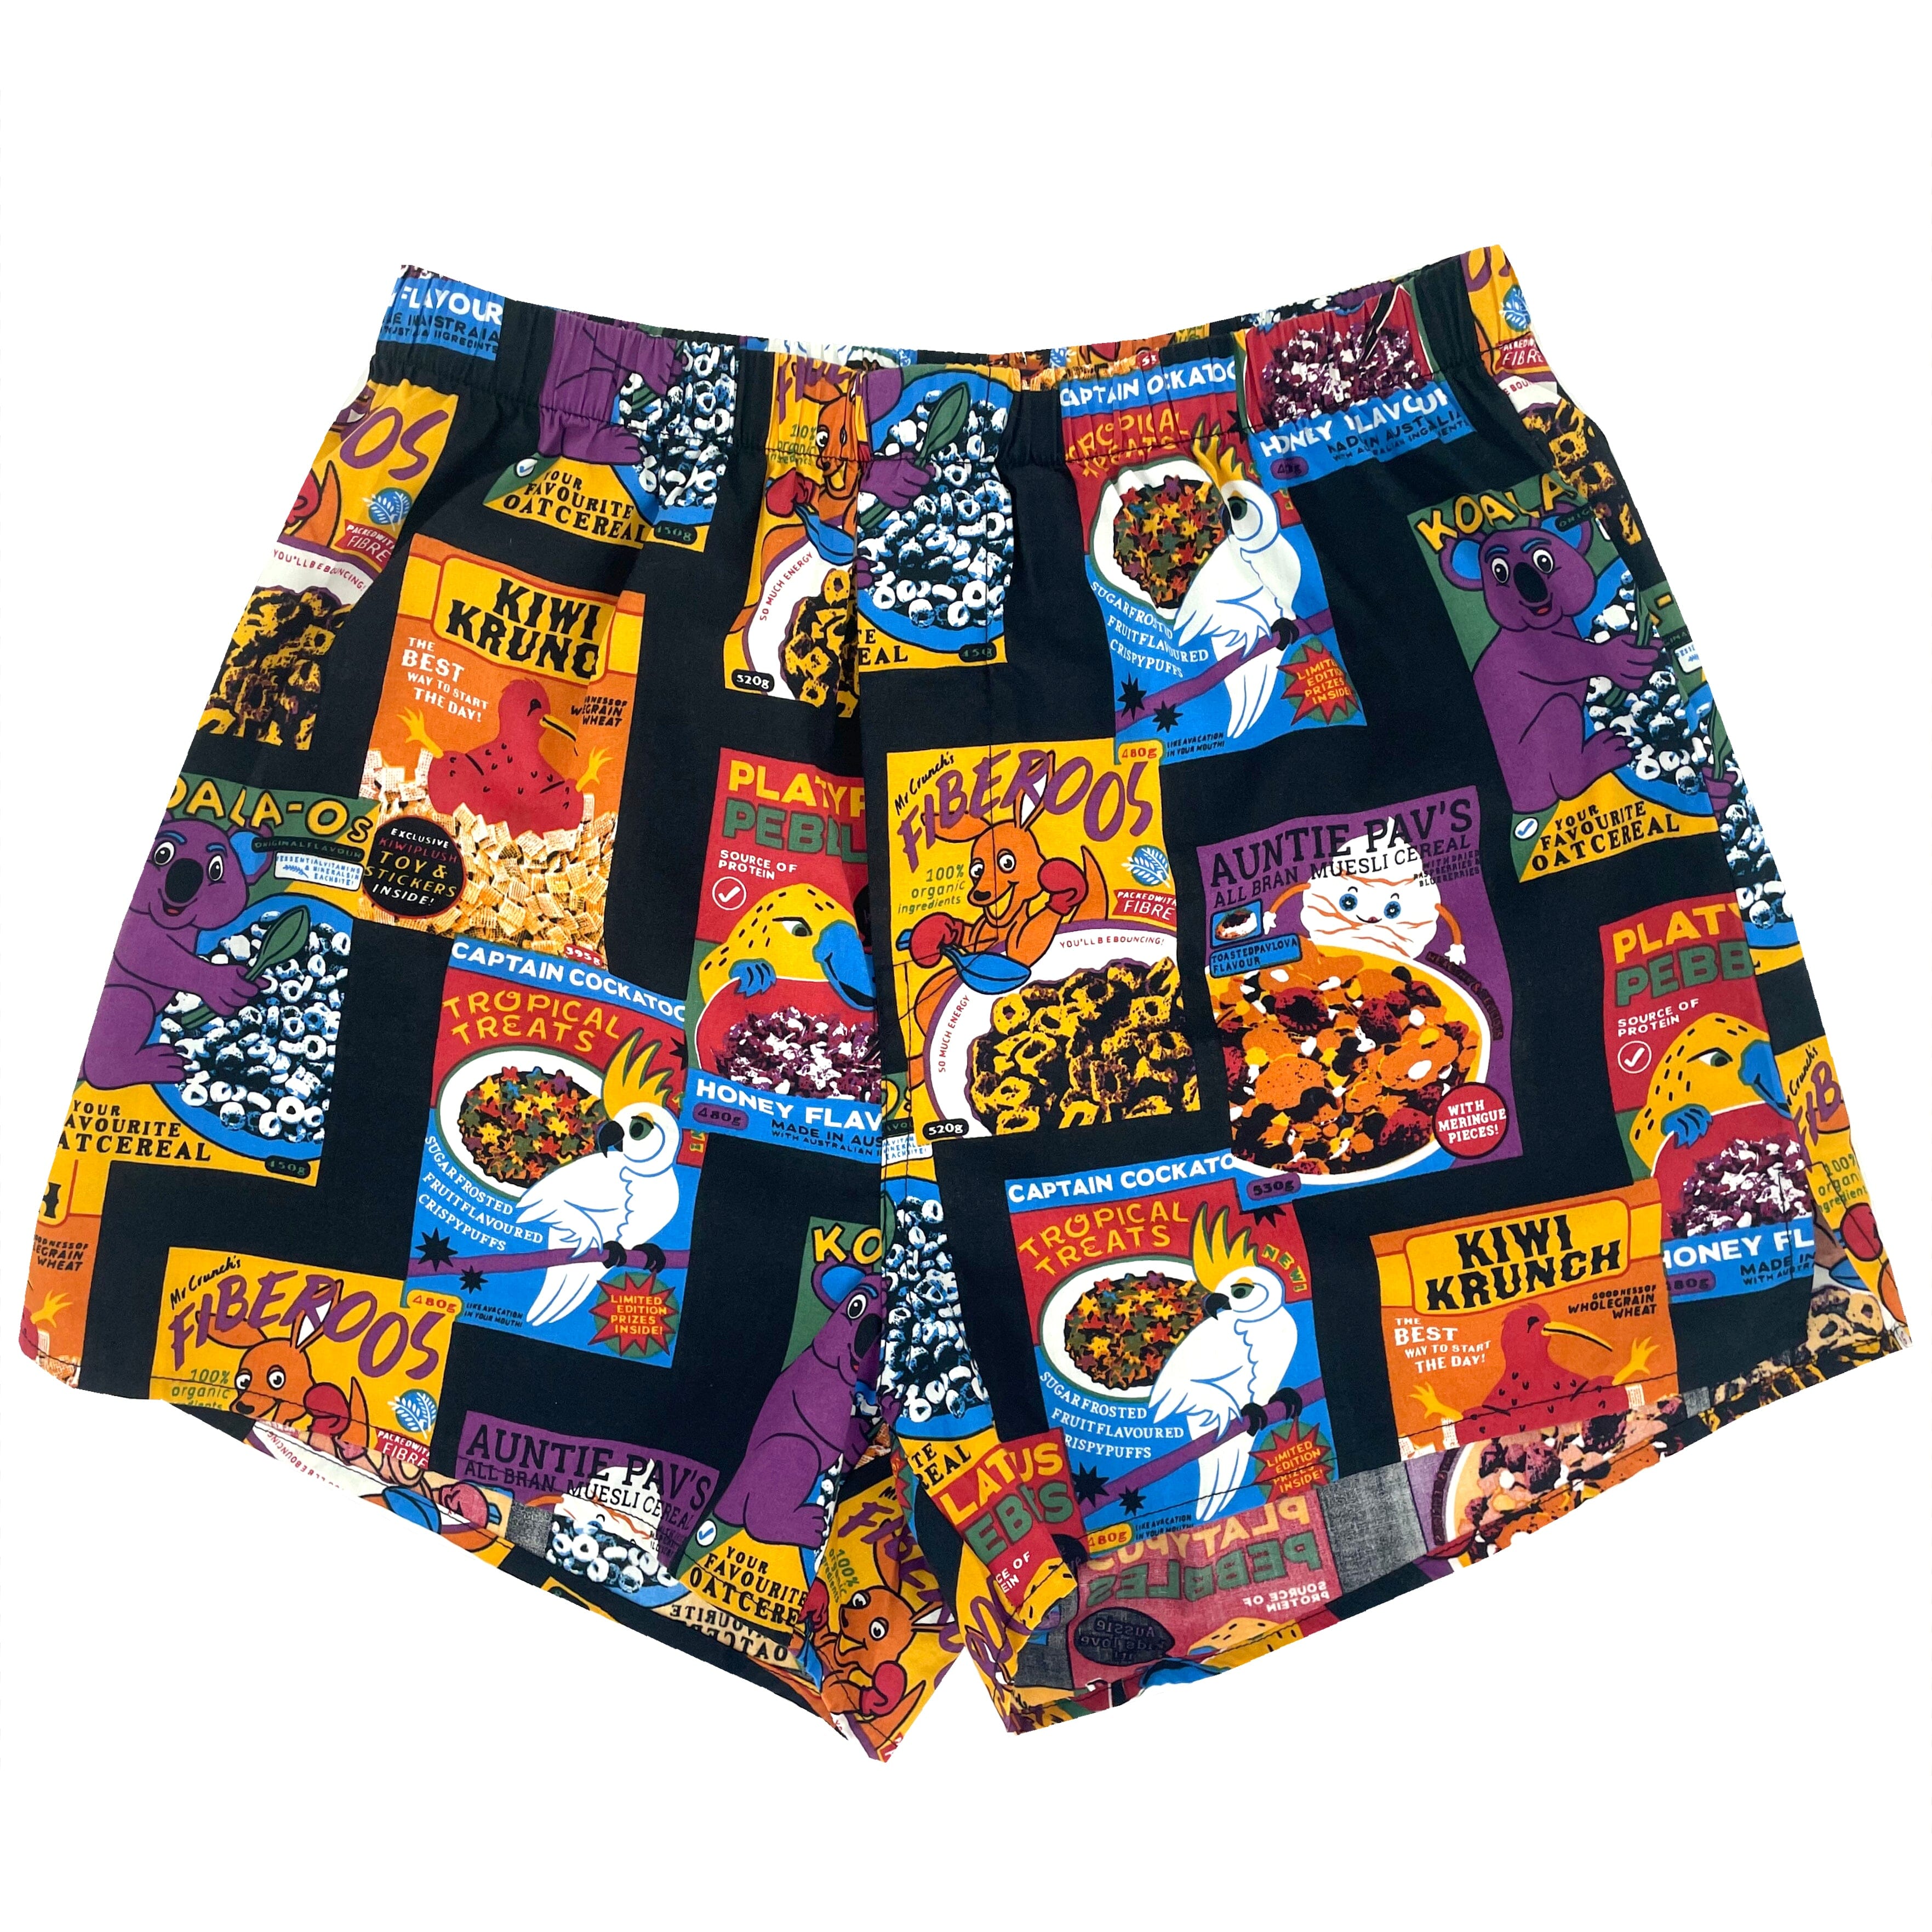 Men's Breakfast Themed Colorful Cereal Boxes Print Cotton Boxer Shorts